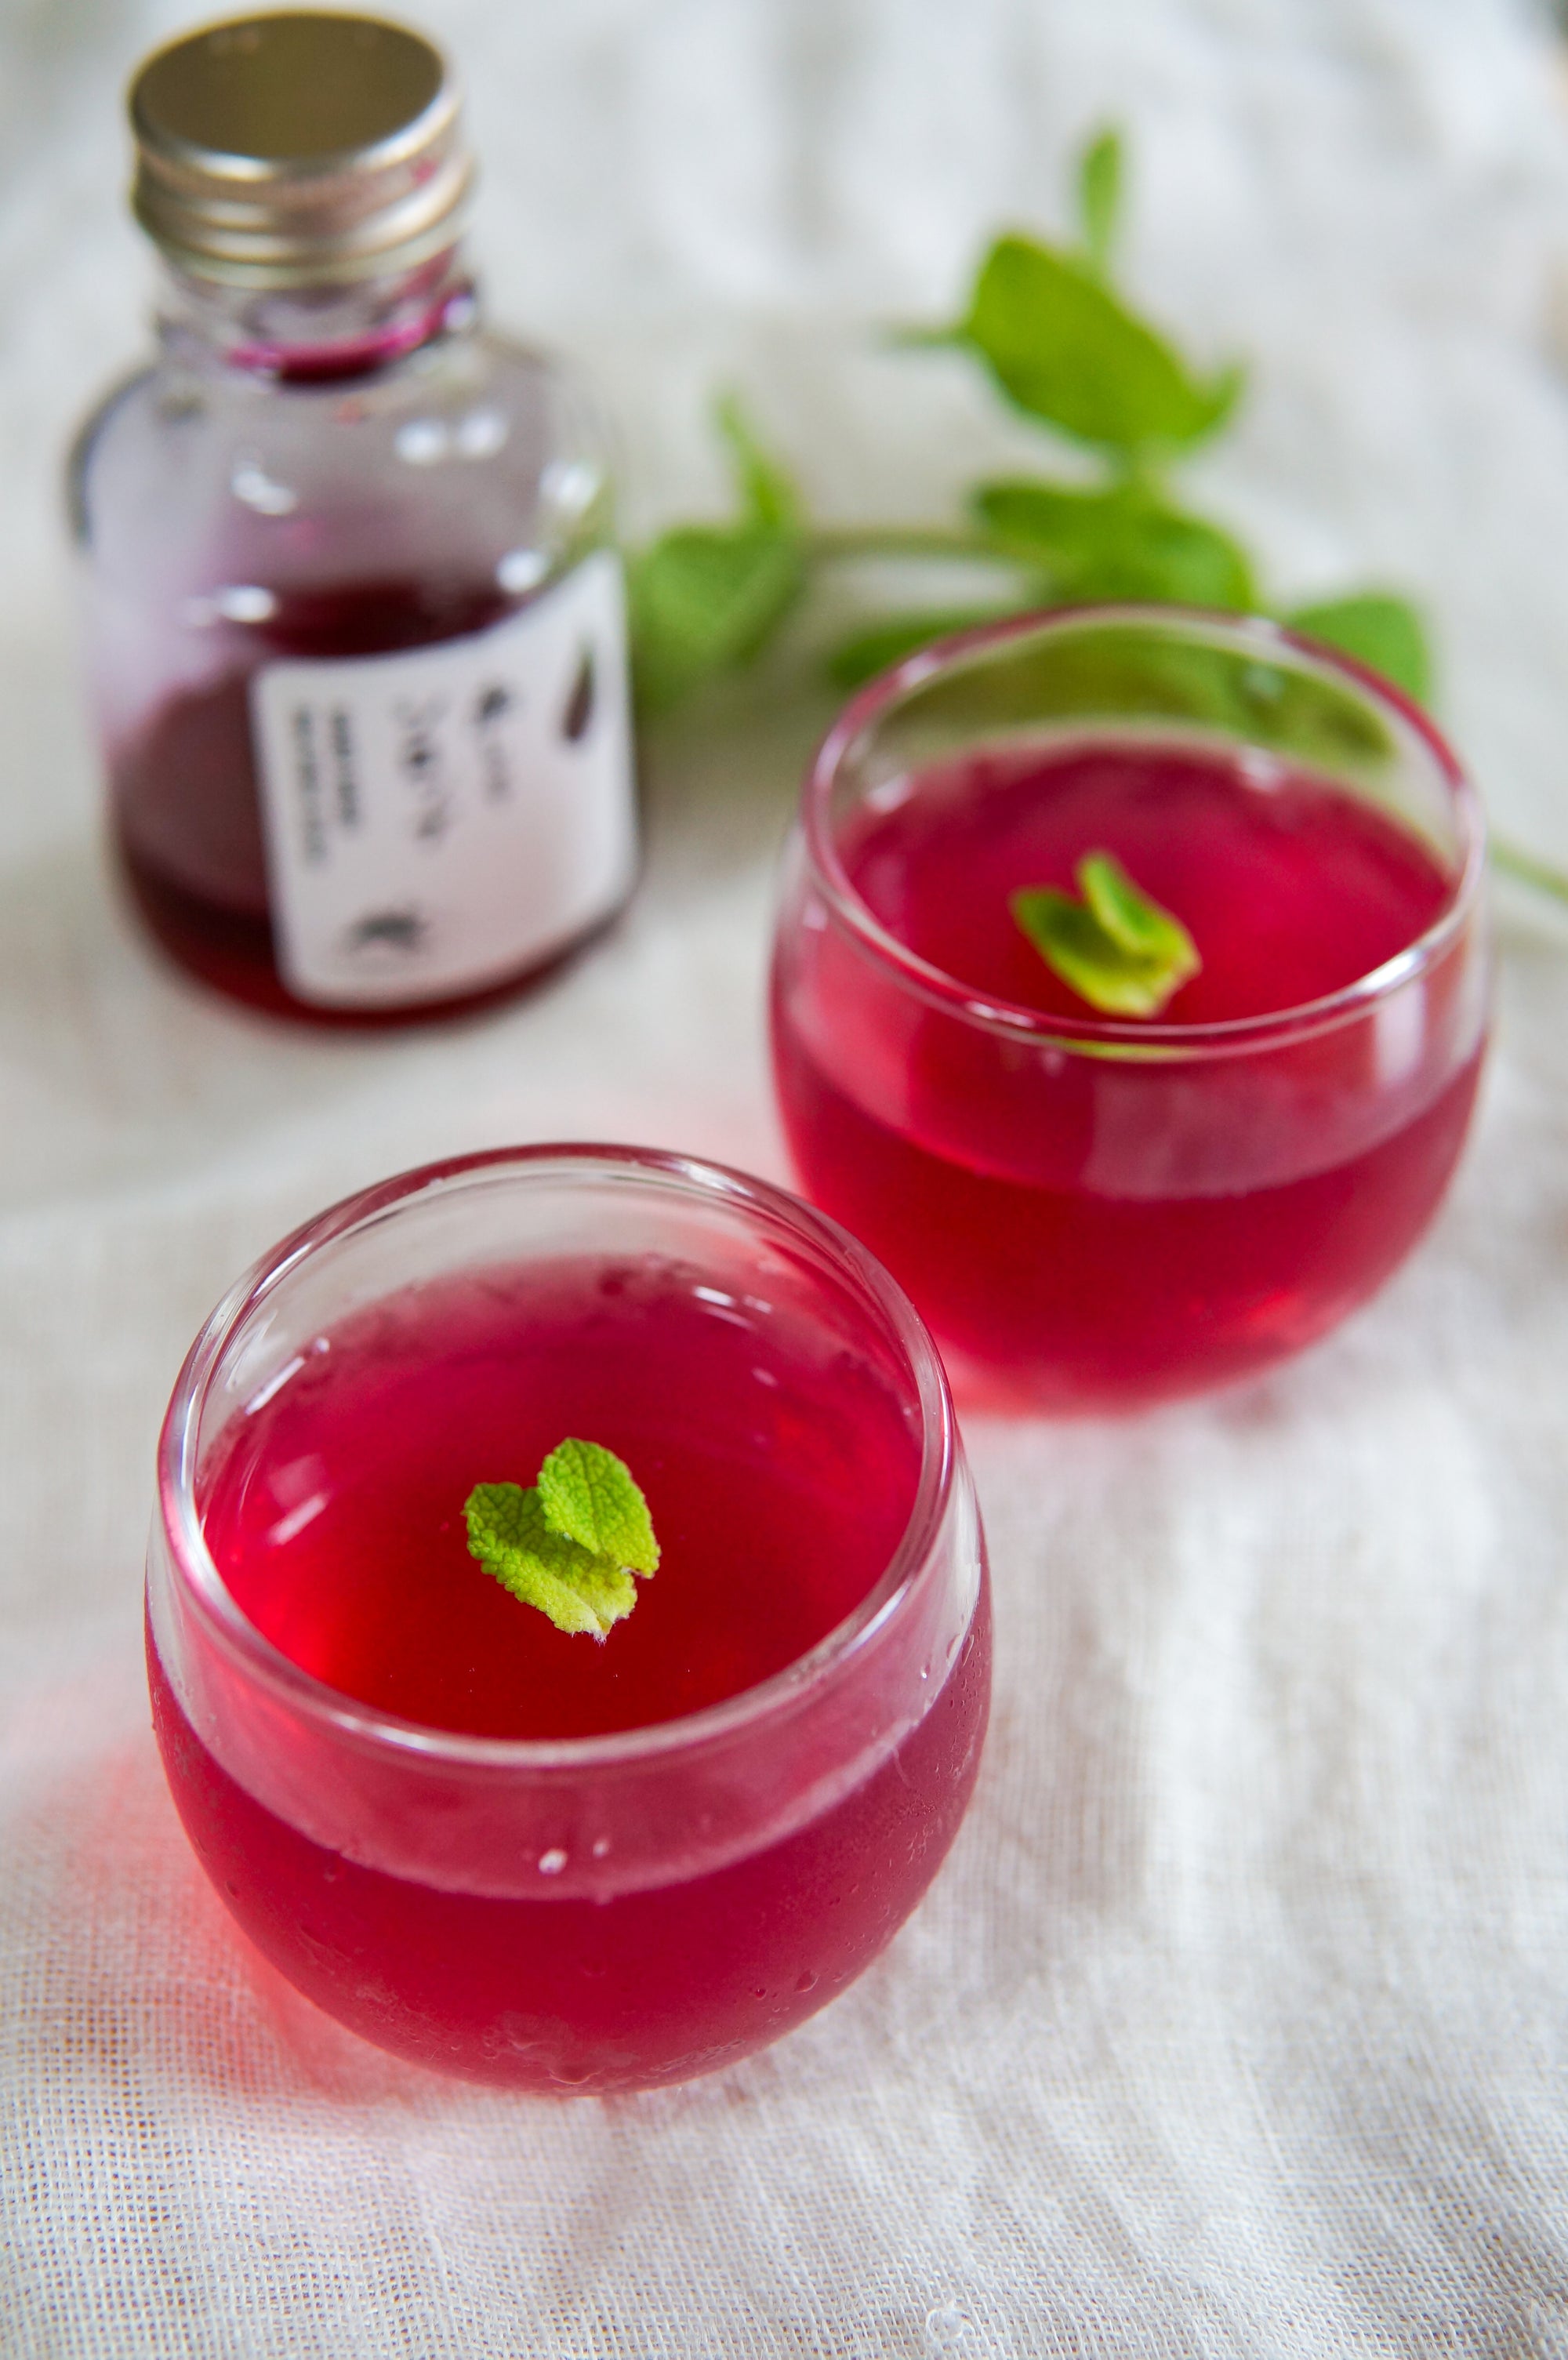 RECIPE: Red Shiso Syrup Jelly